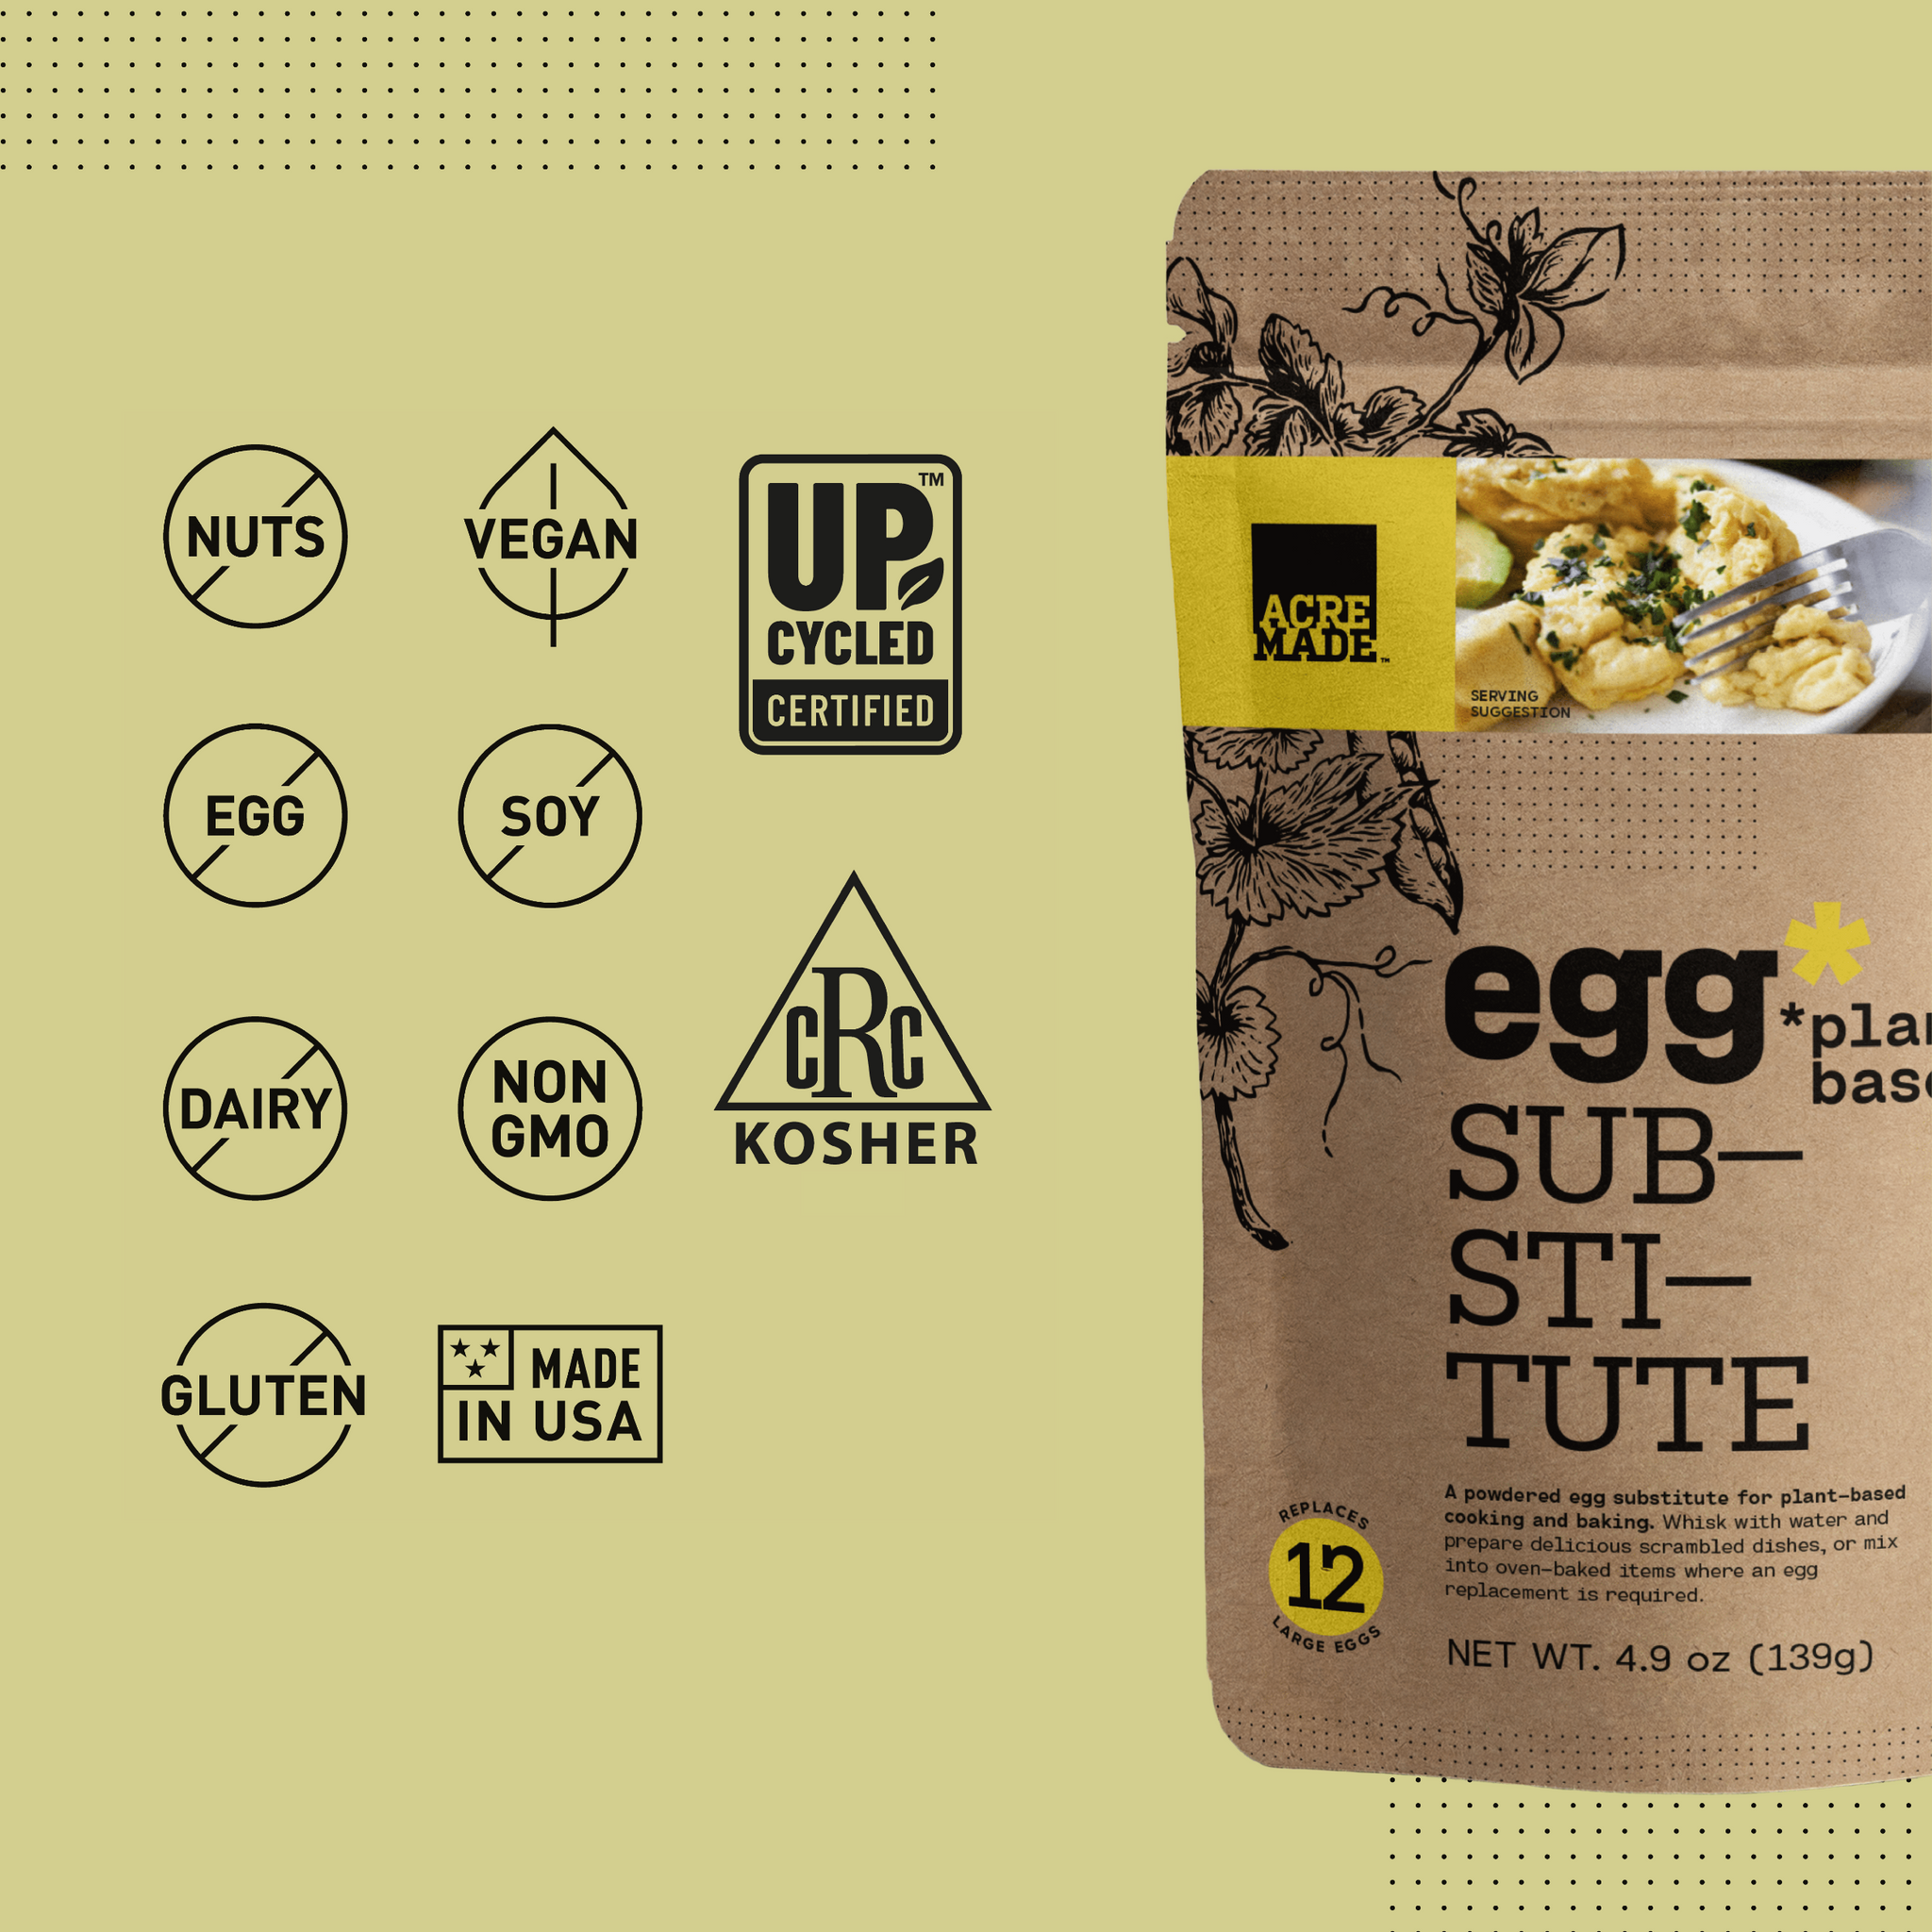 AcreMade Plant-Based Egg Substitute Foodservice Case